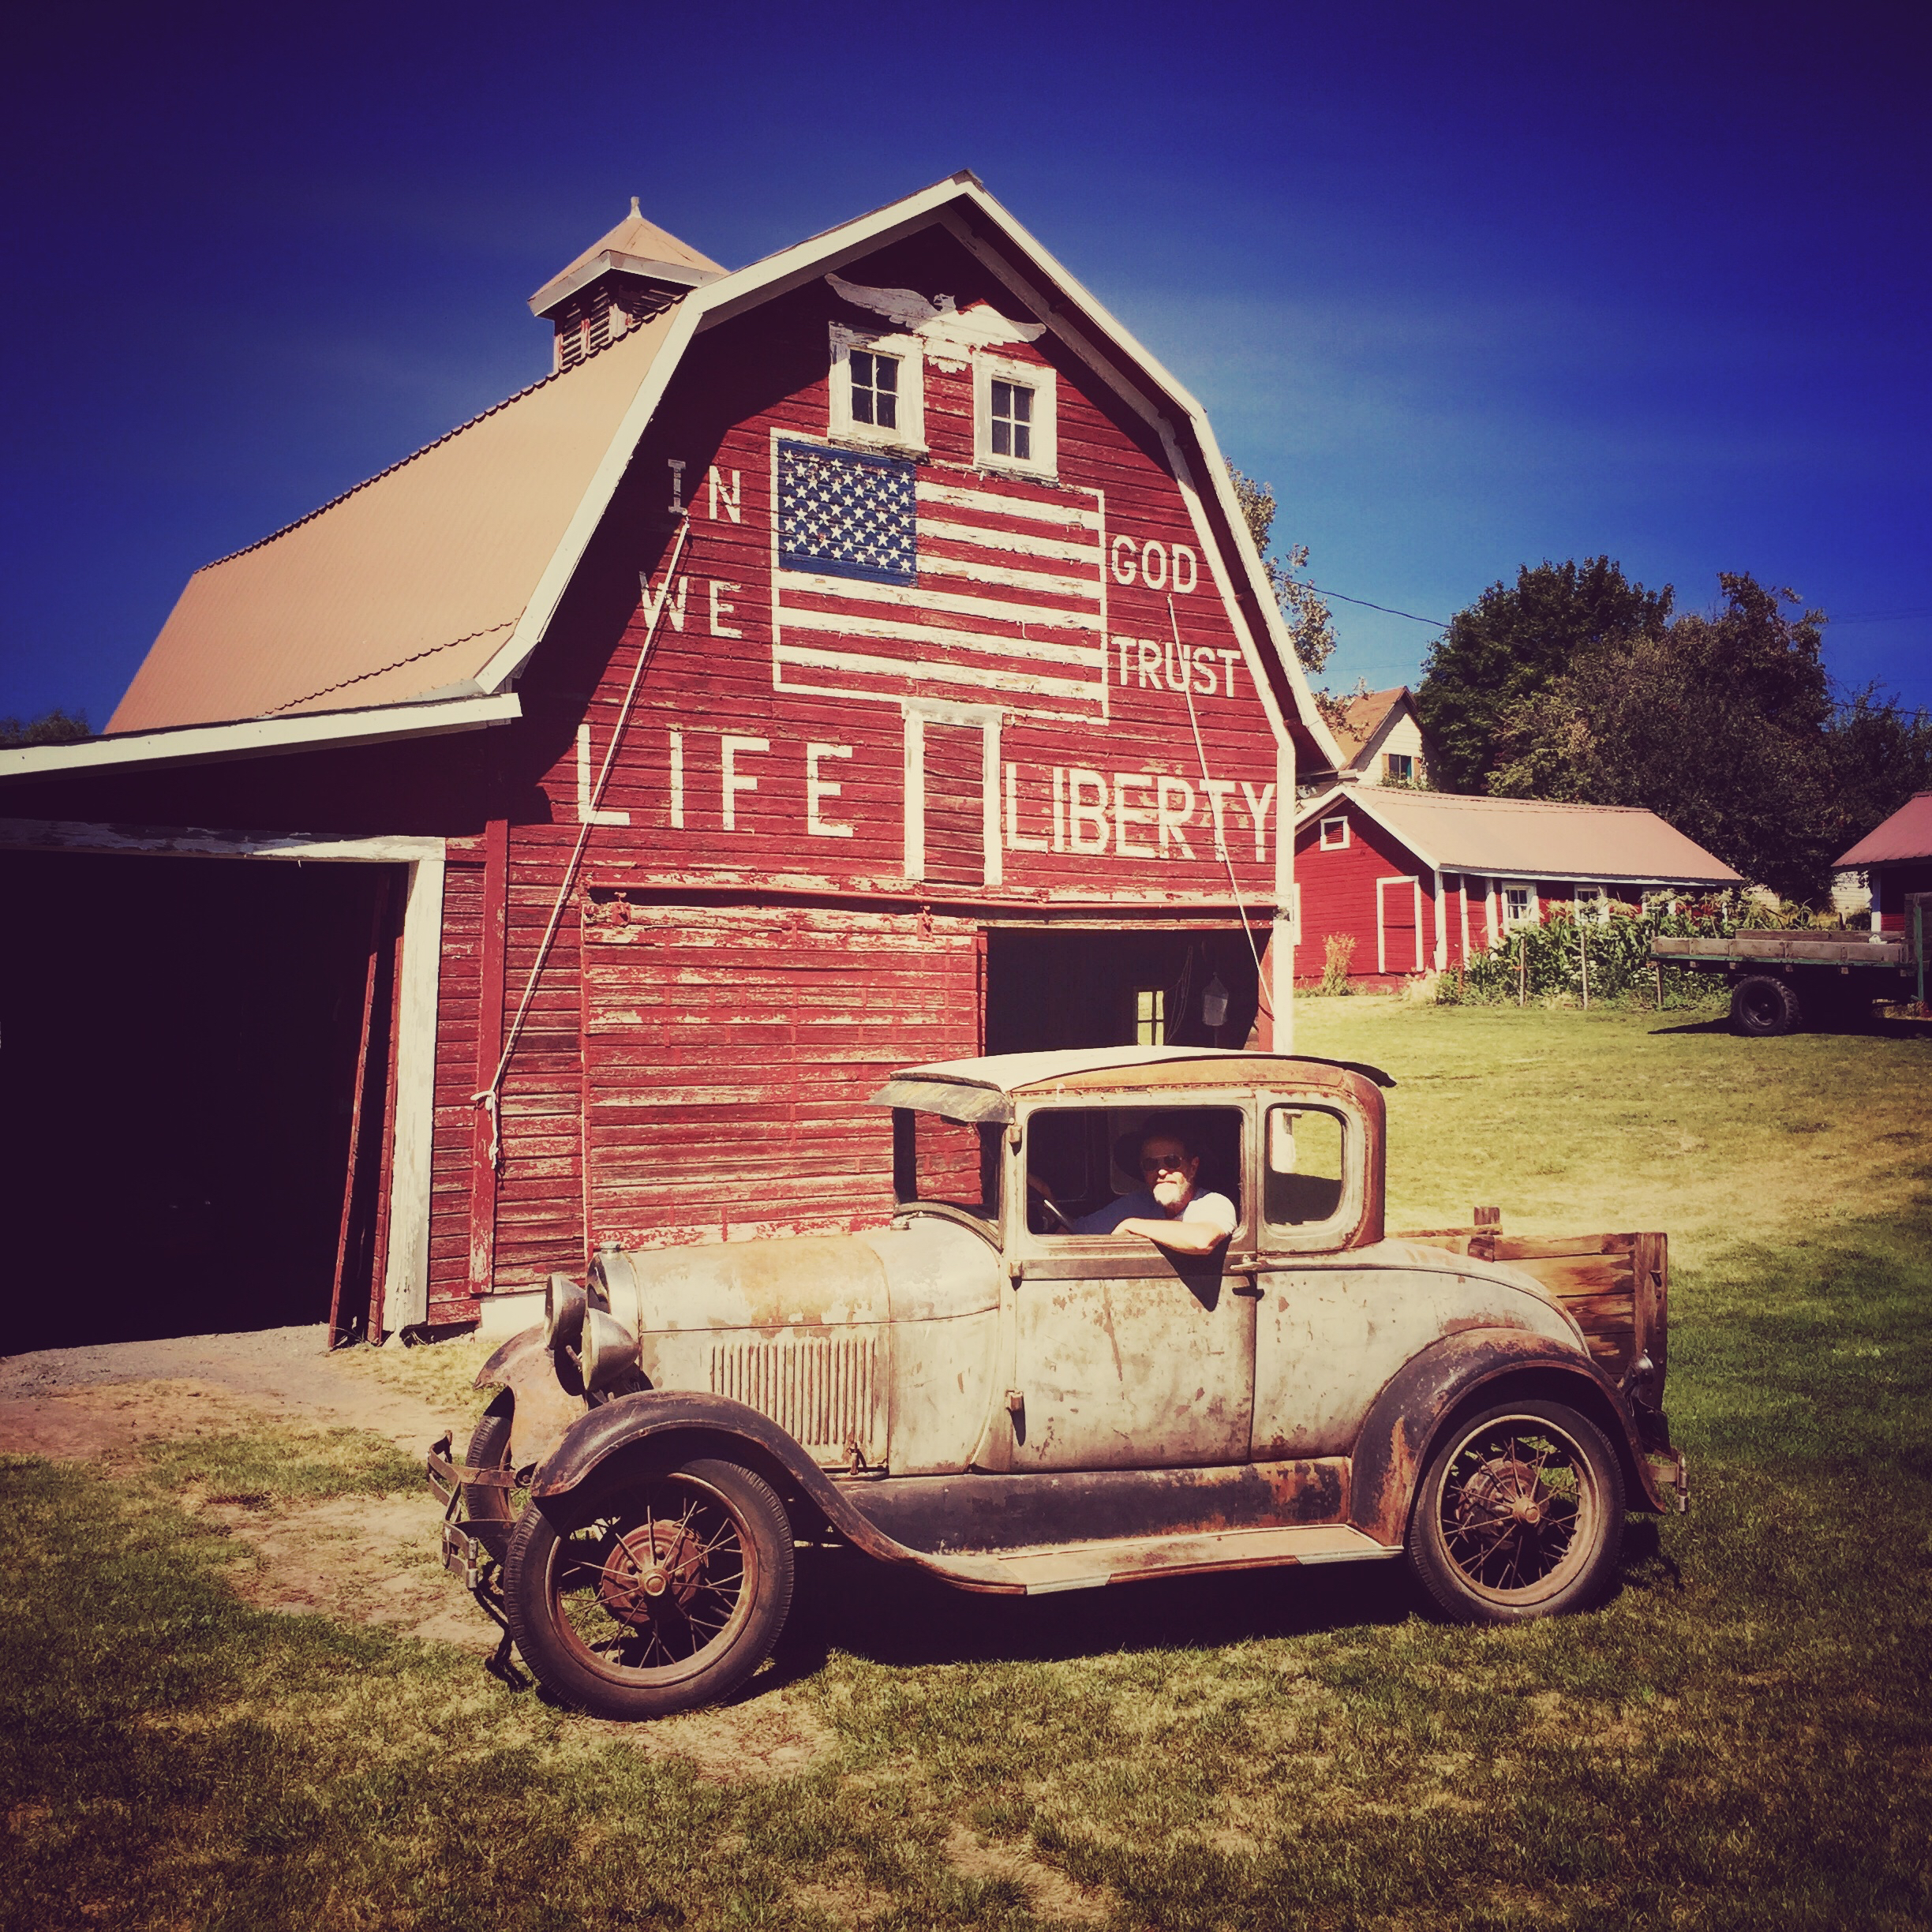 Nice guy, old car and old barn in the Palouse